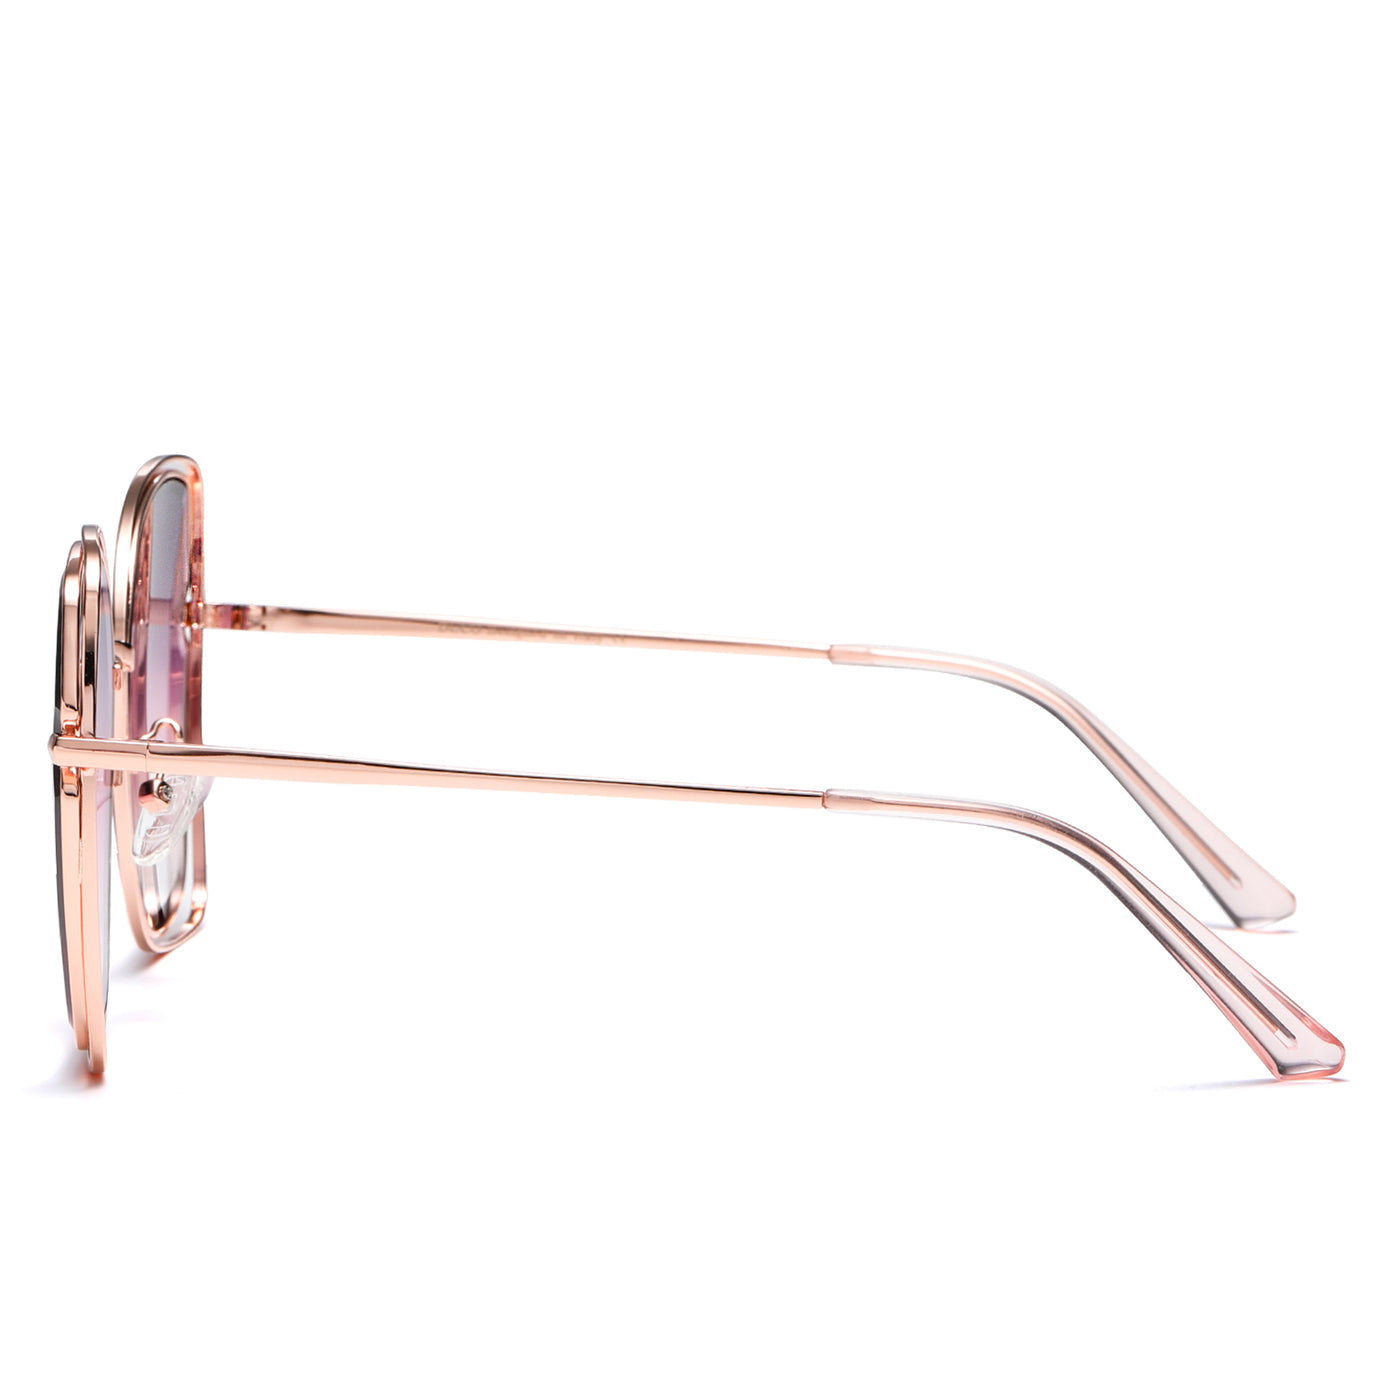 DUCO GLASSES-The right kind of shady Lavender Duco Women